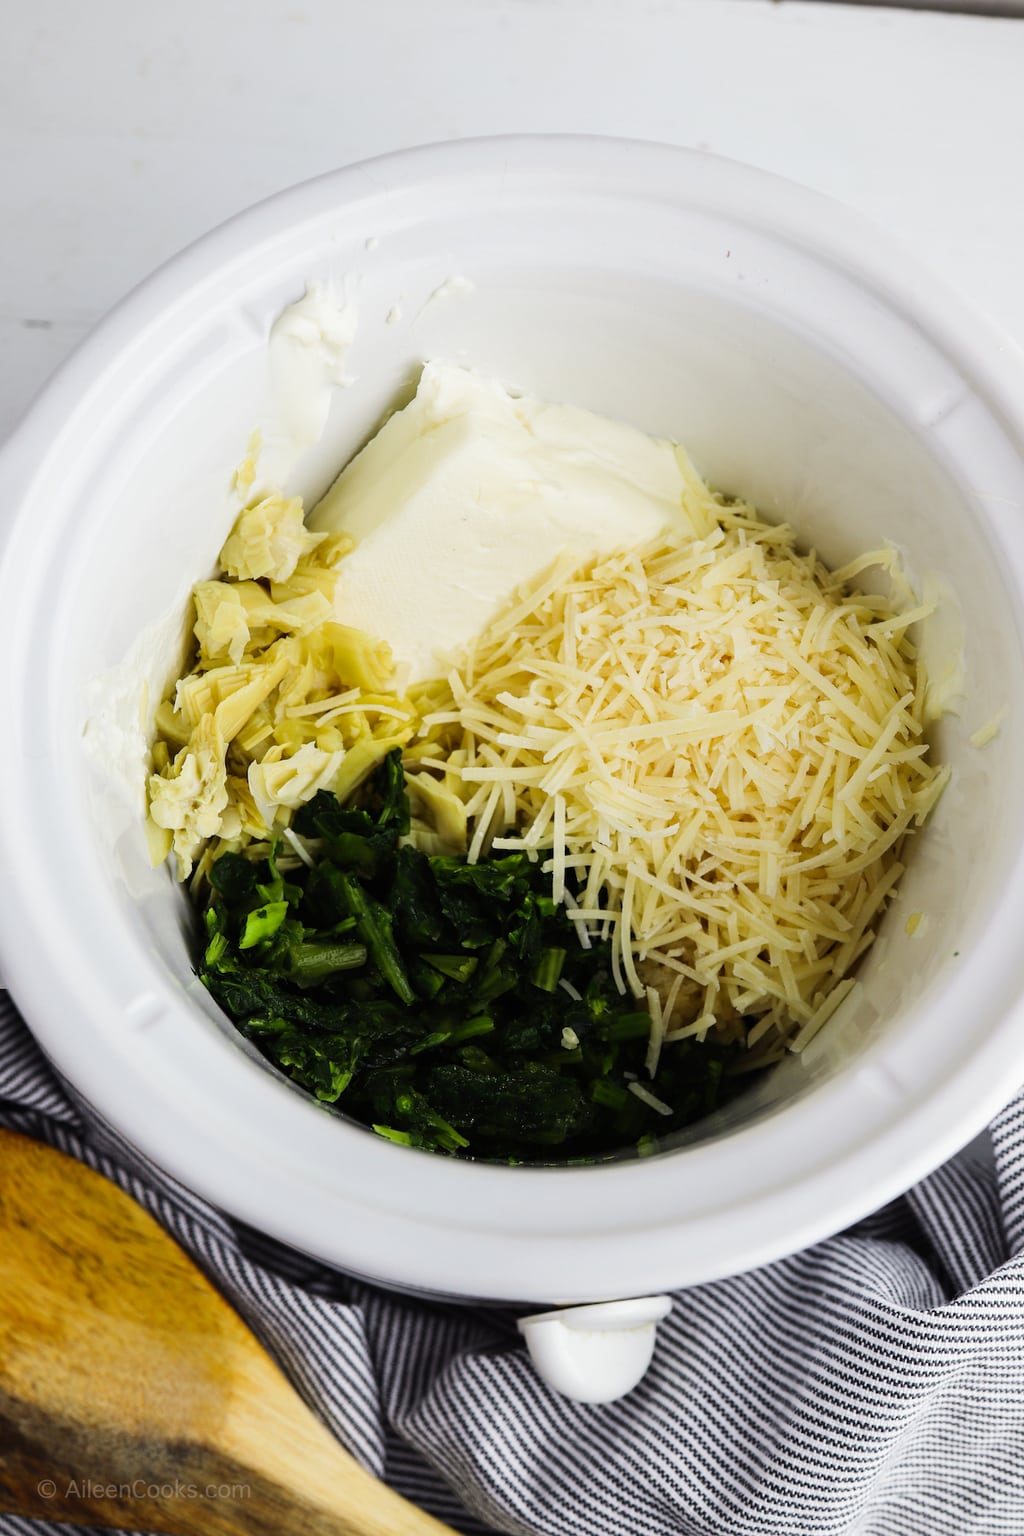 Cream cheese, parmesan cheese, spinach, and artichoke hearts inside of a slow cooker.